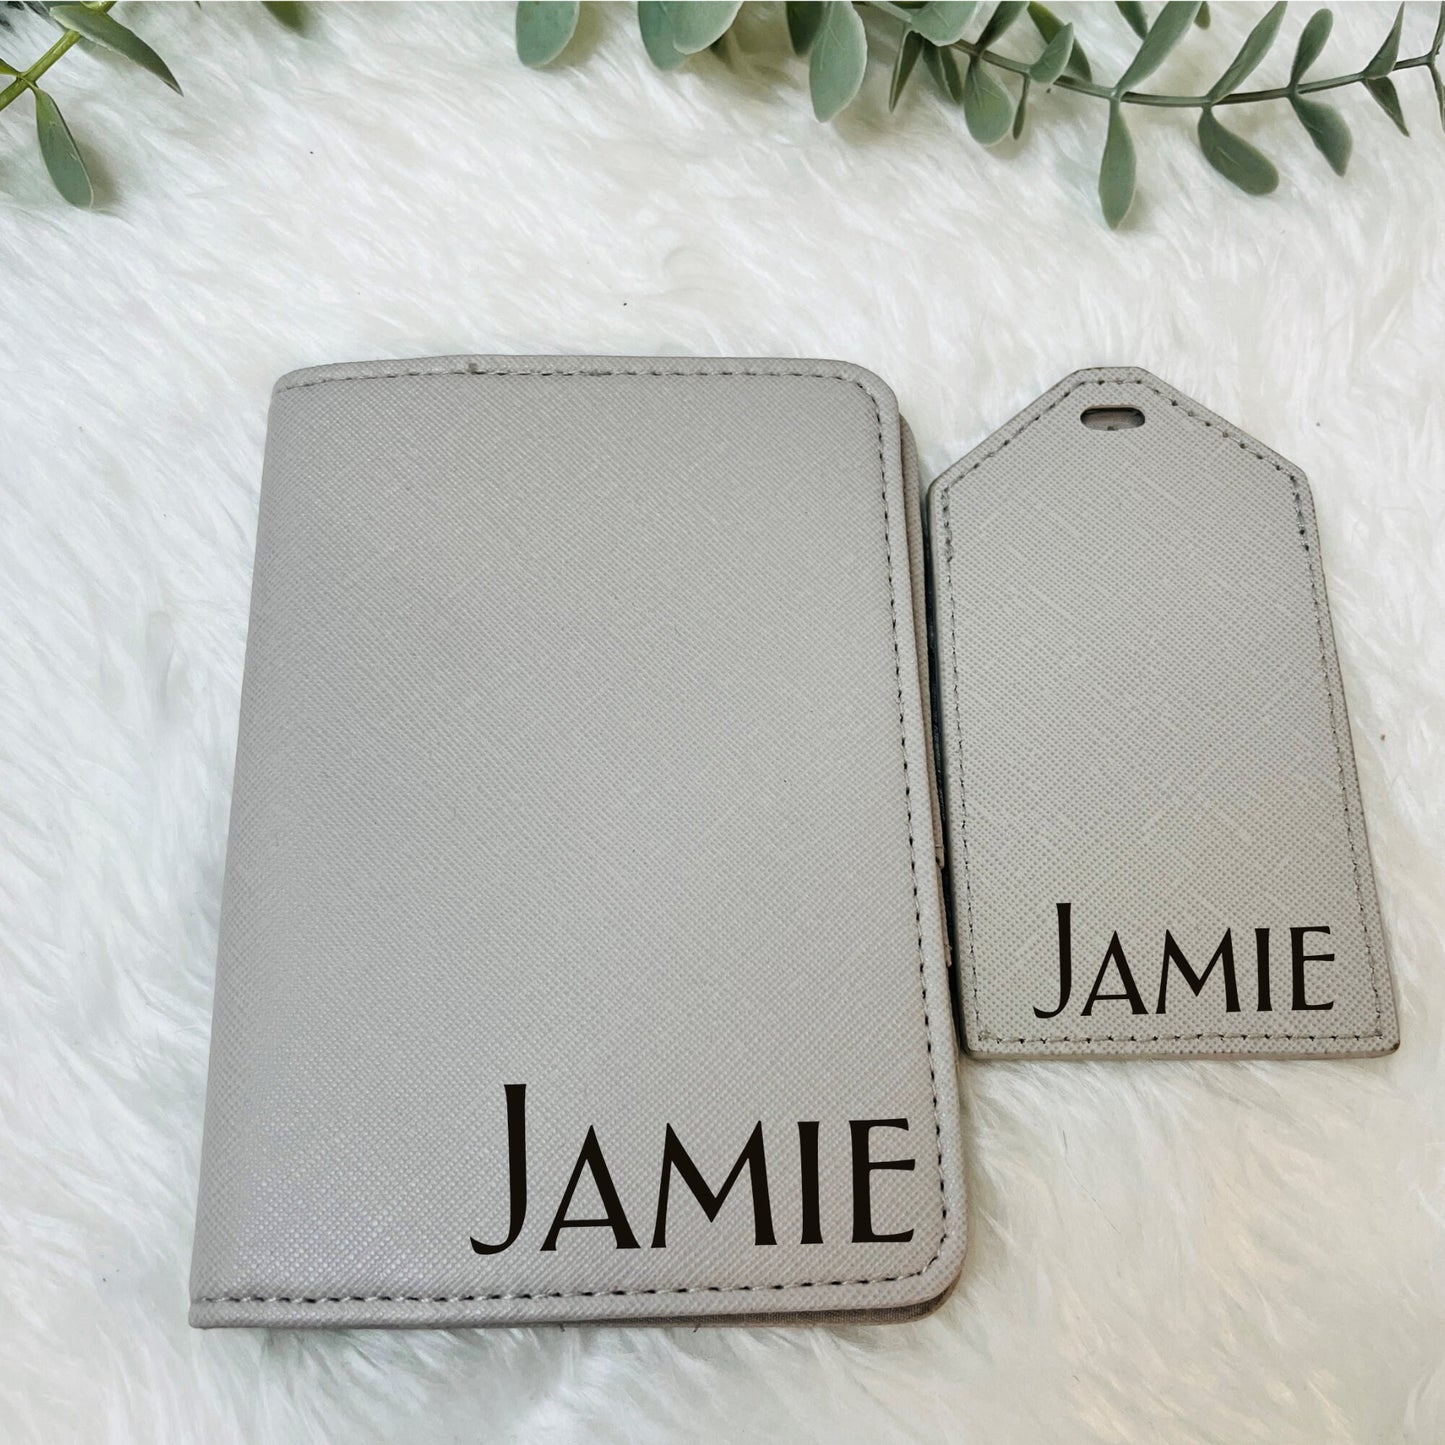 Personalised Faux Leather Passport Cover and Luggage Tag, Travel Accessories, Gift for Newlyweds